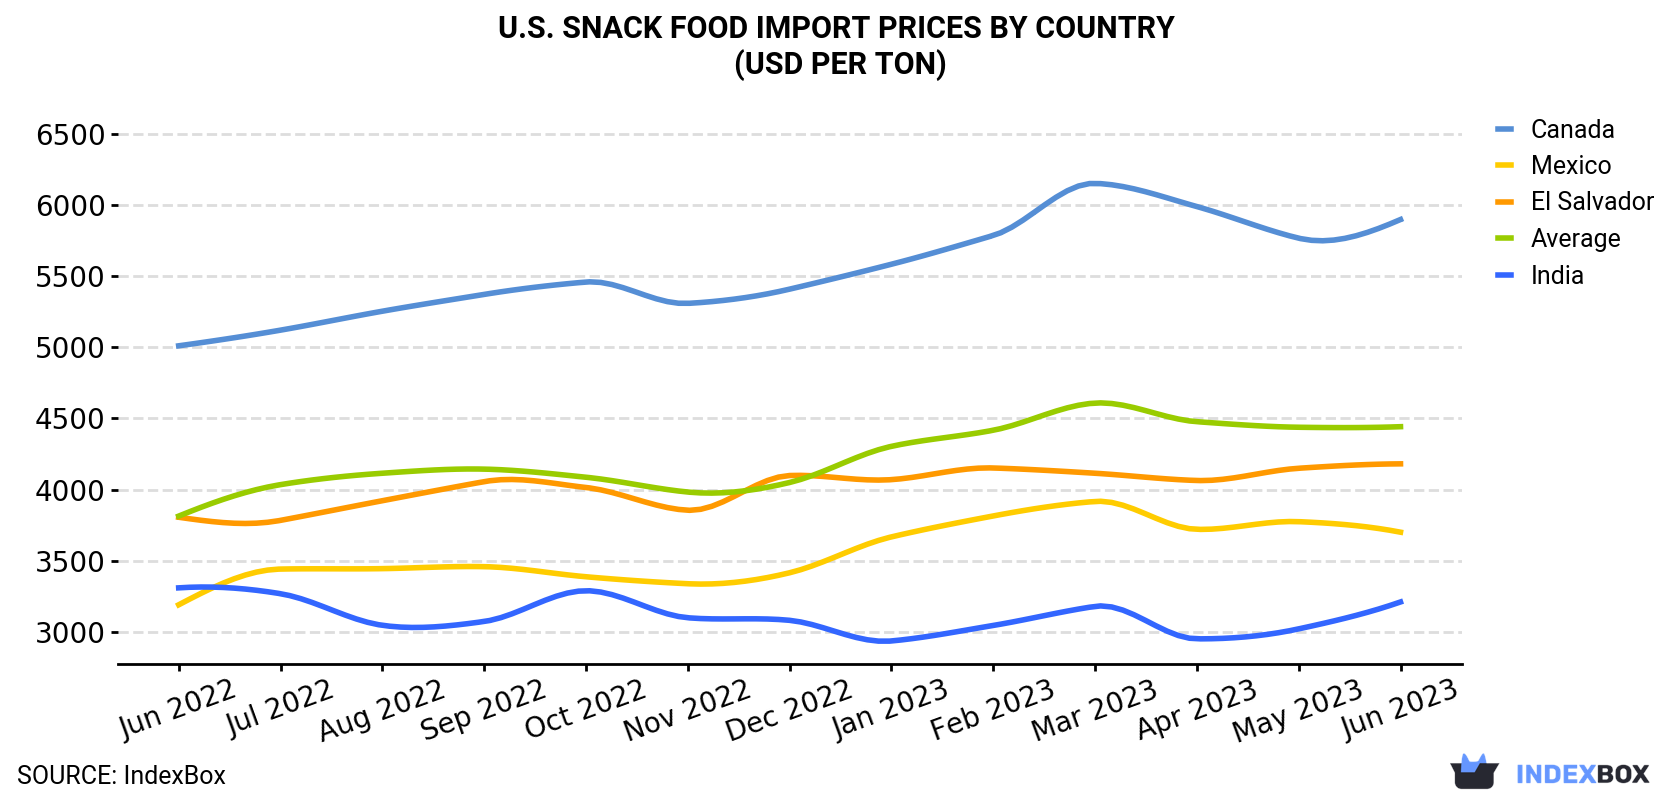 U.S. Snack Food Import Prices By Country (USD Per Ton)